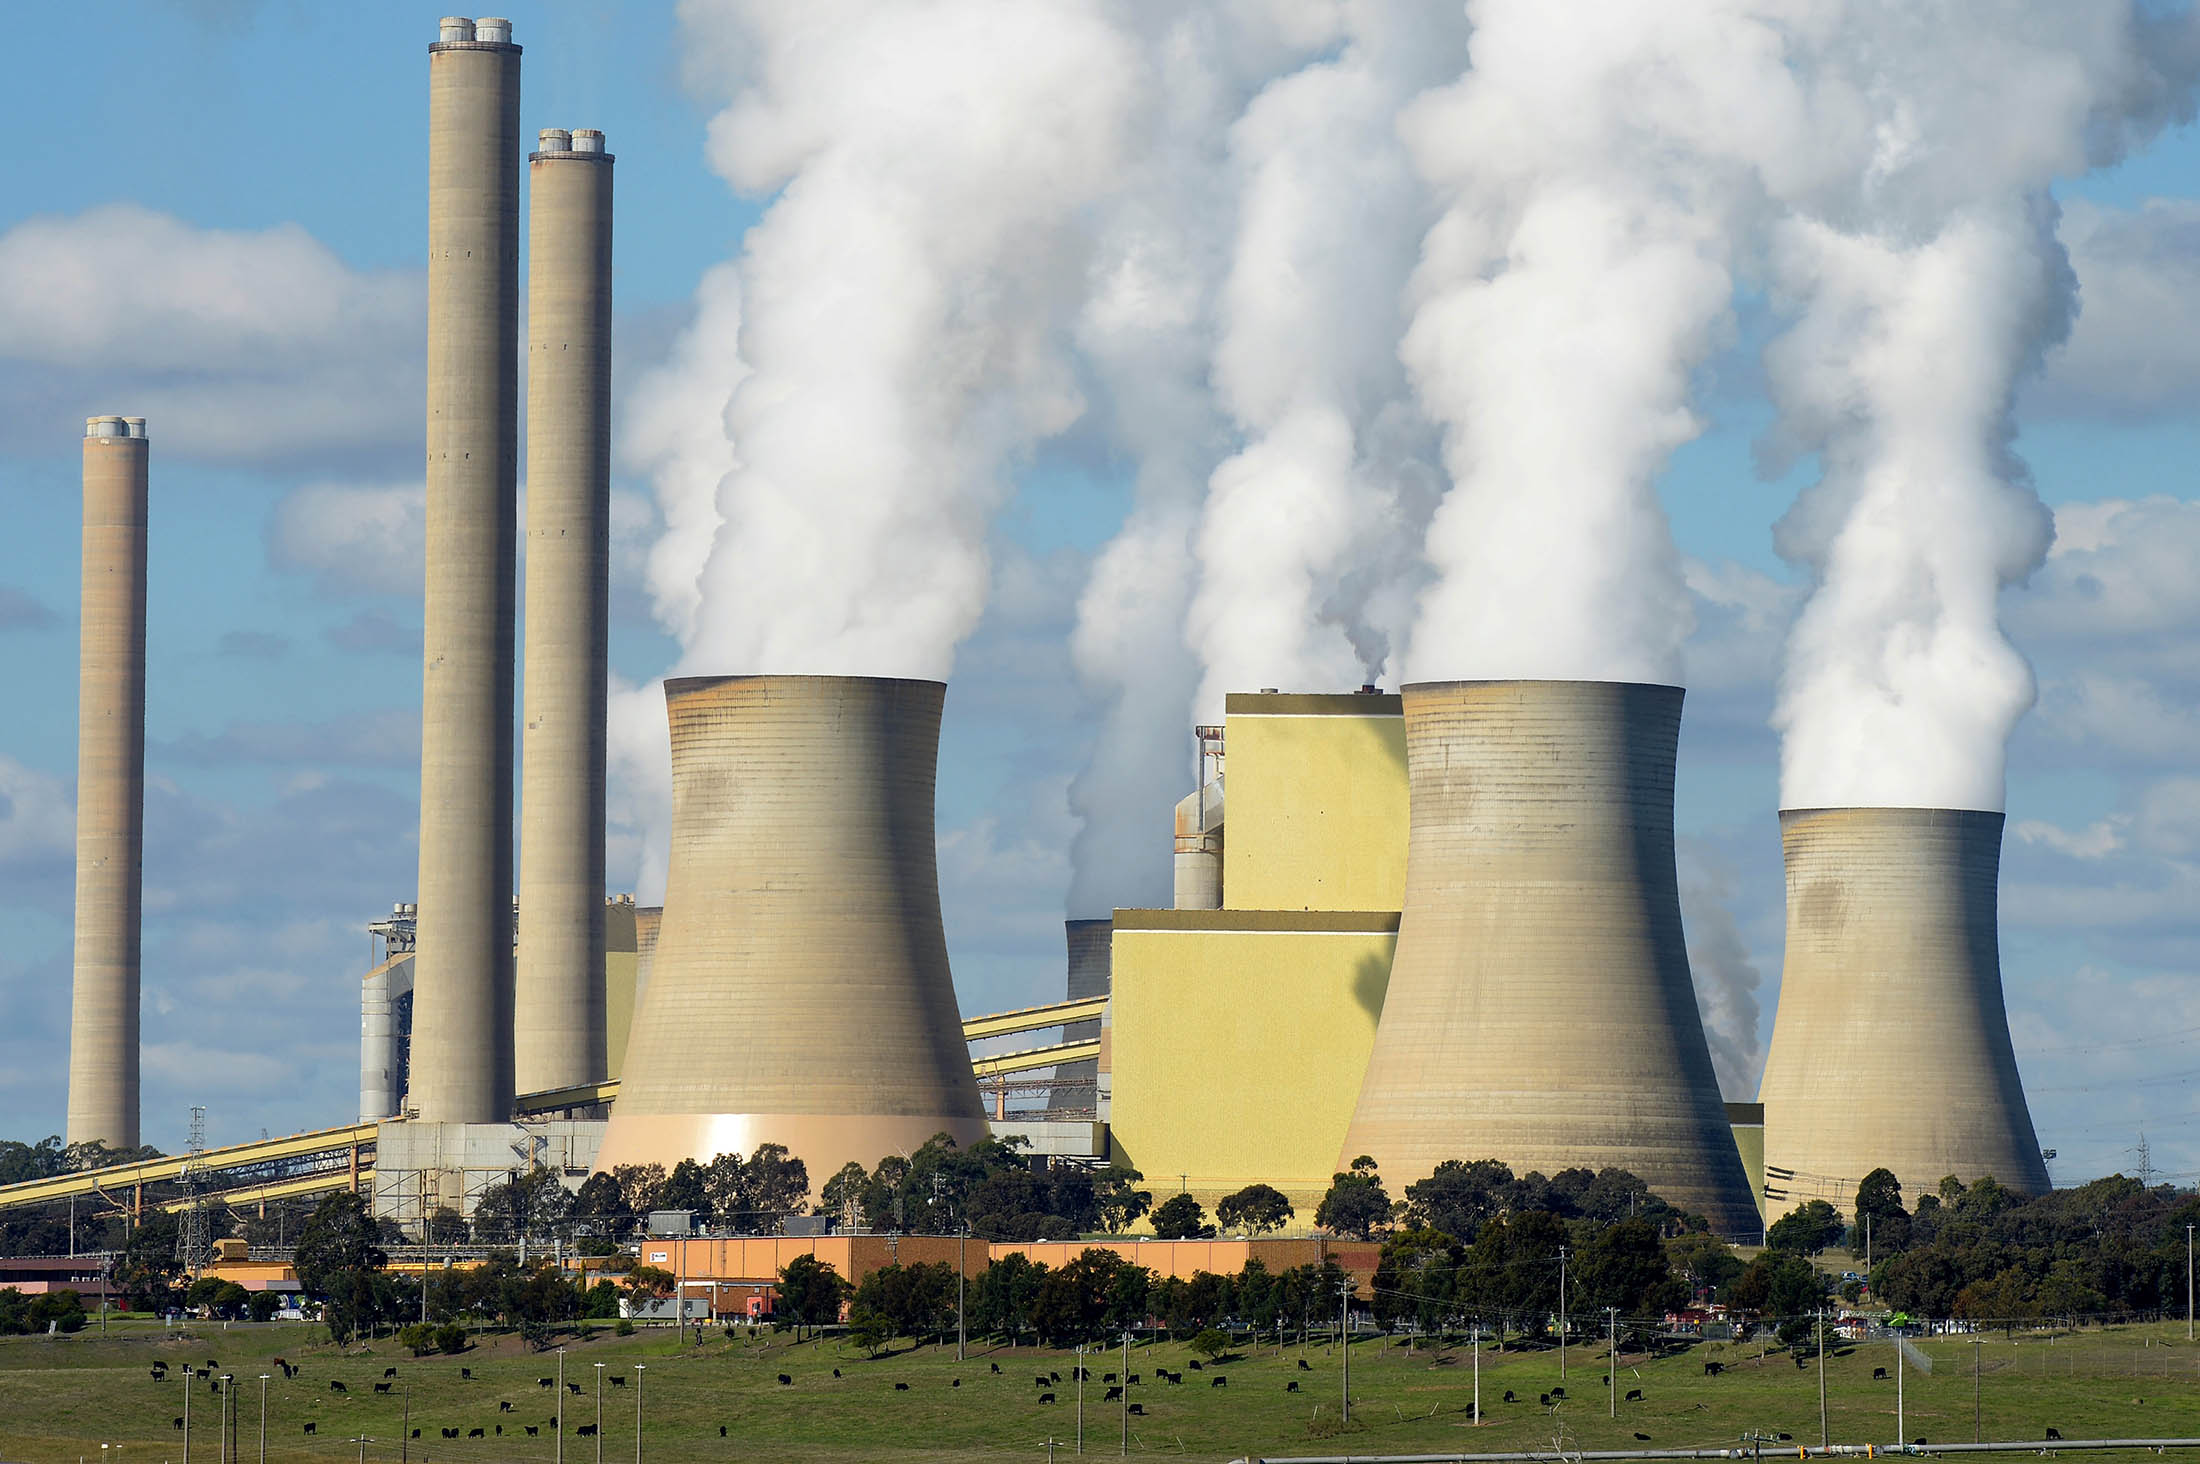 Steam billows from the cooling towers of the Loy Yang coal-fired power station operated by AGL Energy Ltd. in the Latrobe Valley, Australia.
